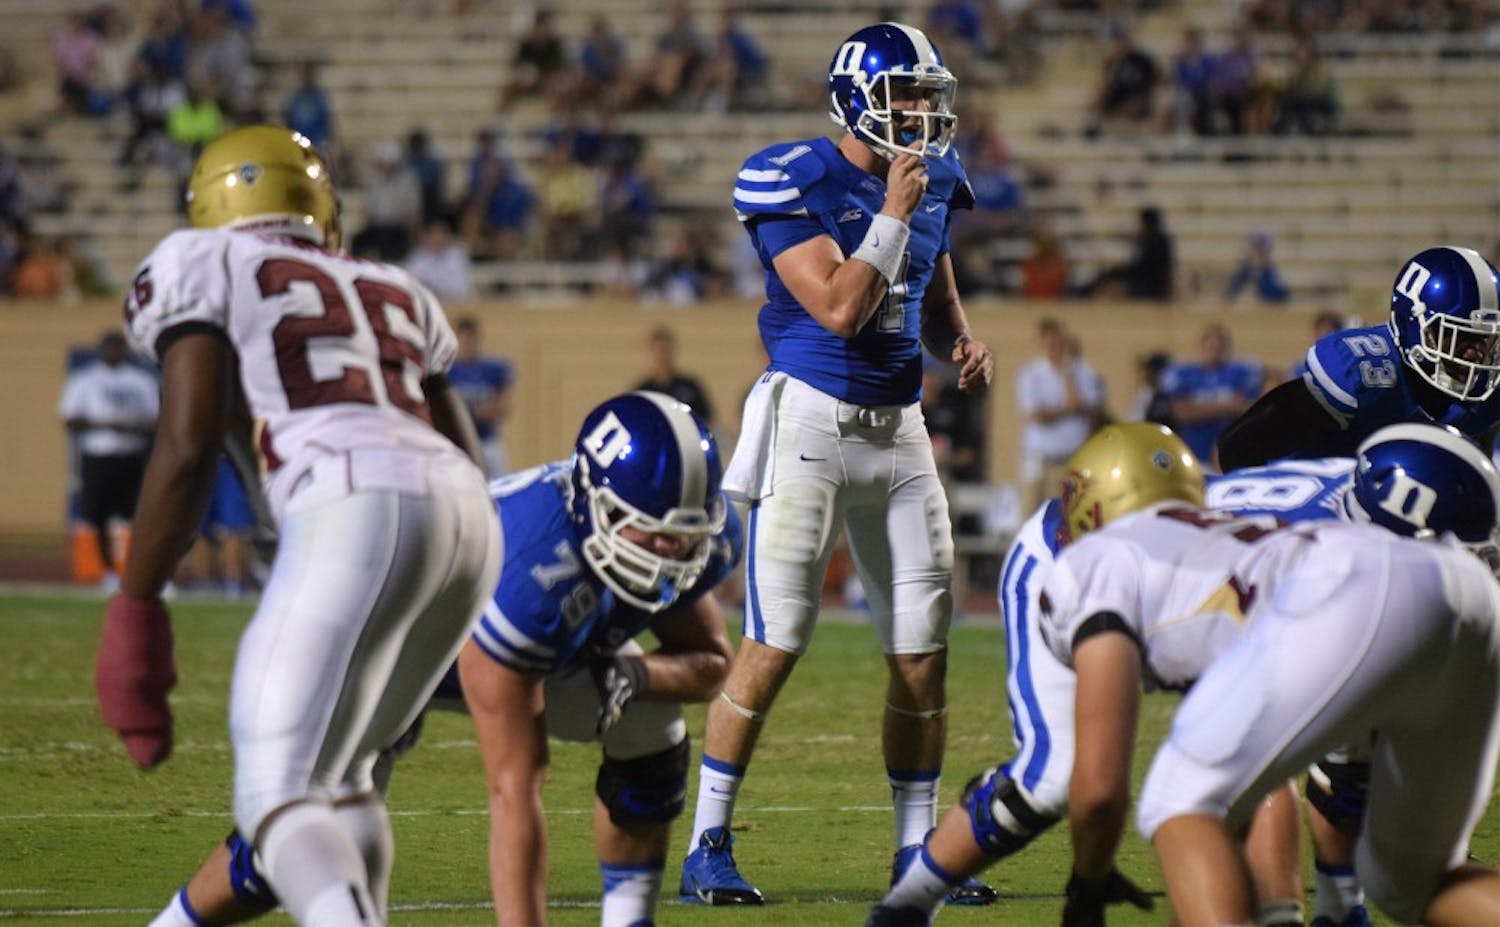 Redshirt sophomore quarterback Thomas Sirk accumulated 58 rushing yards and a pair of touchdown rushes in relief of starter Anthony Boone in Duke's route of the Phoenix.